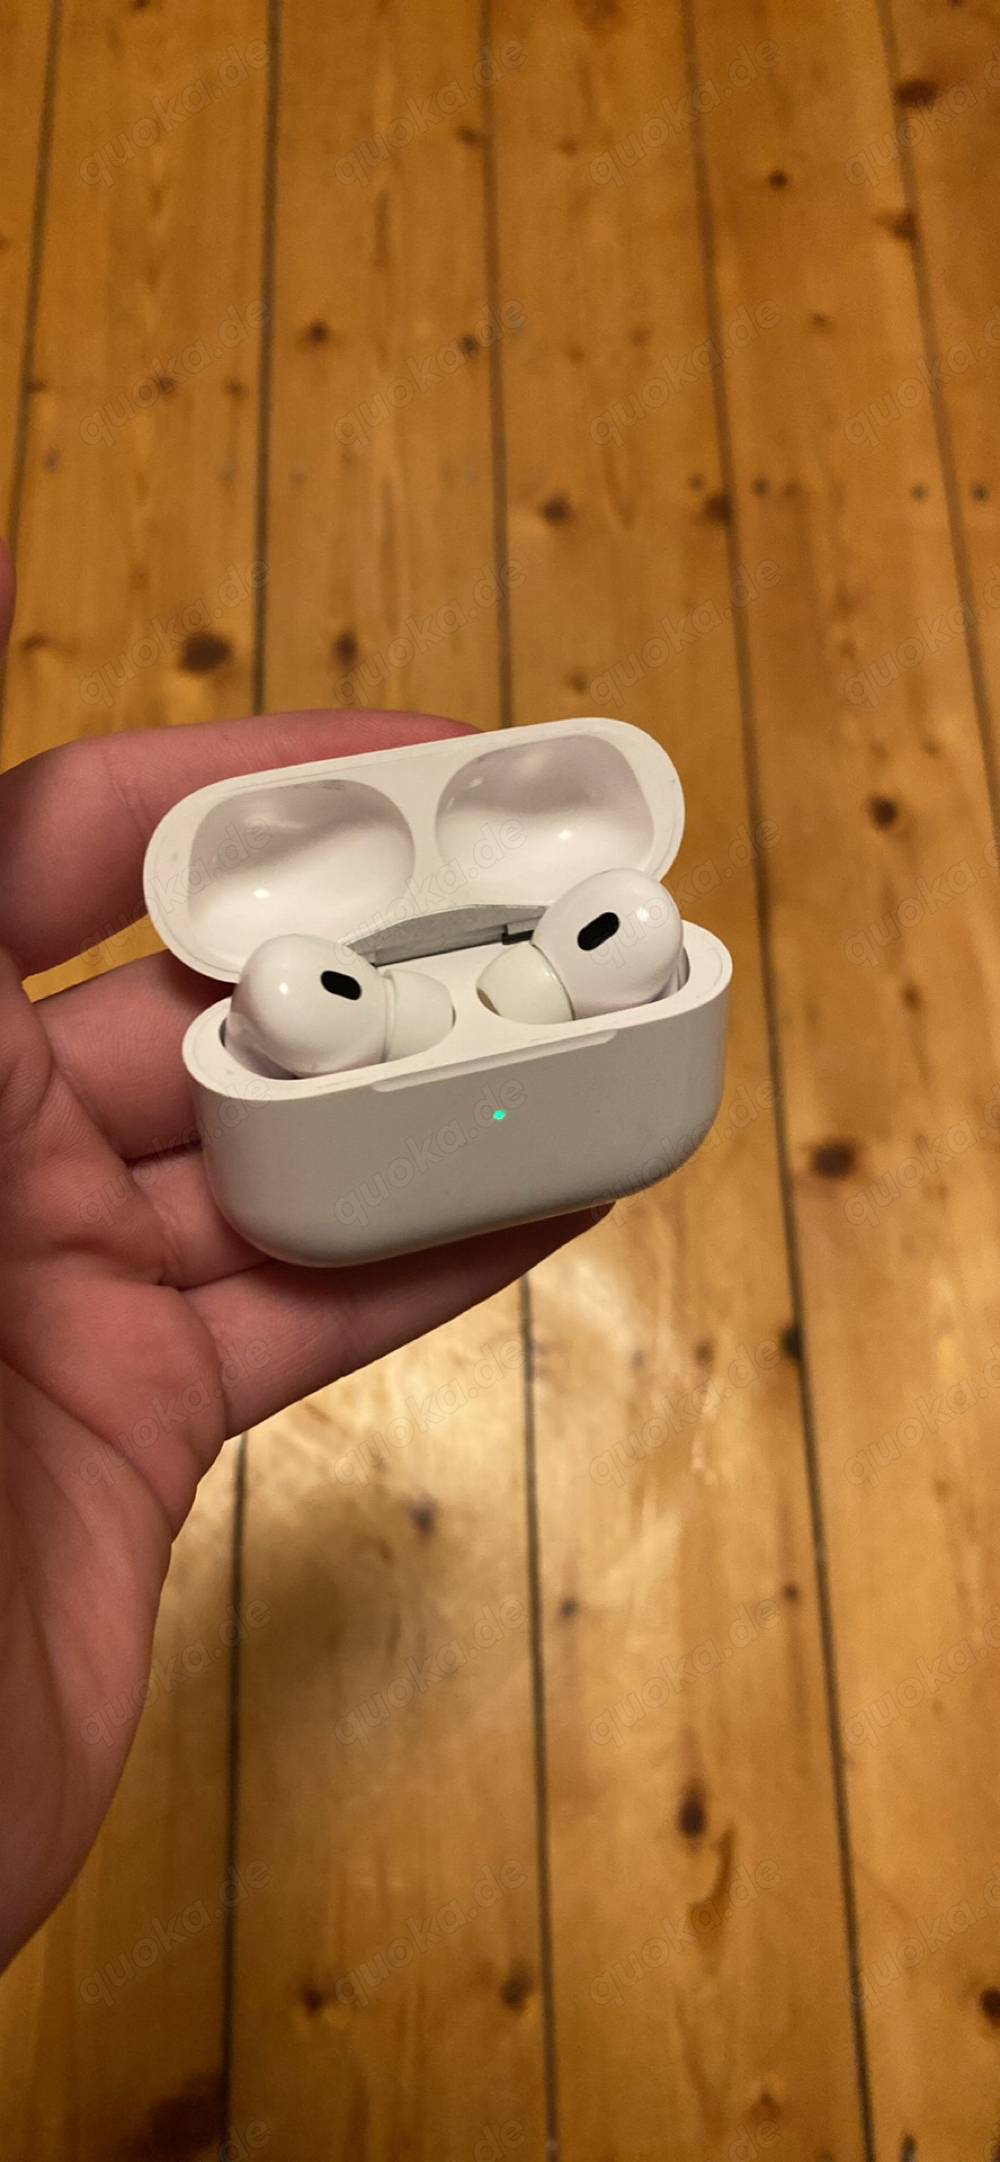 Airpods Pro 2 Generation